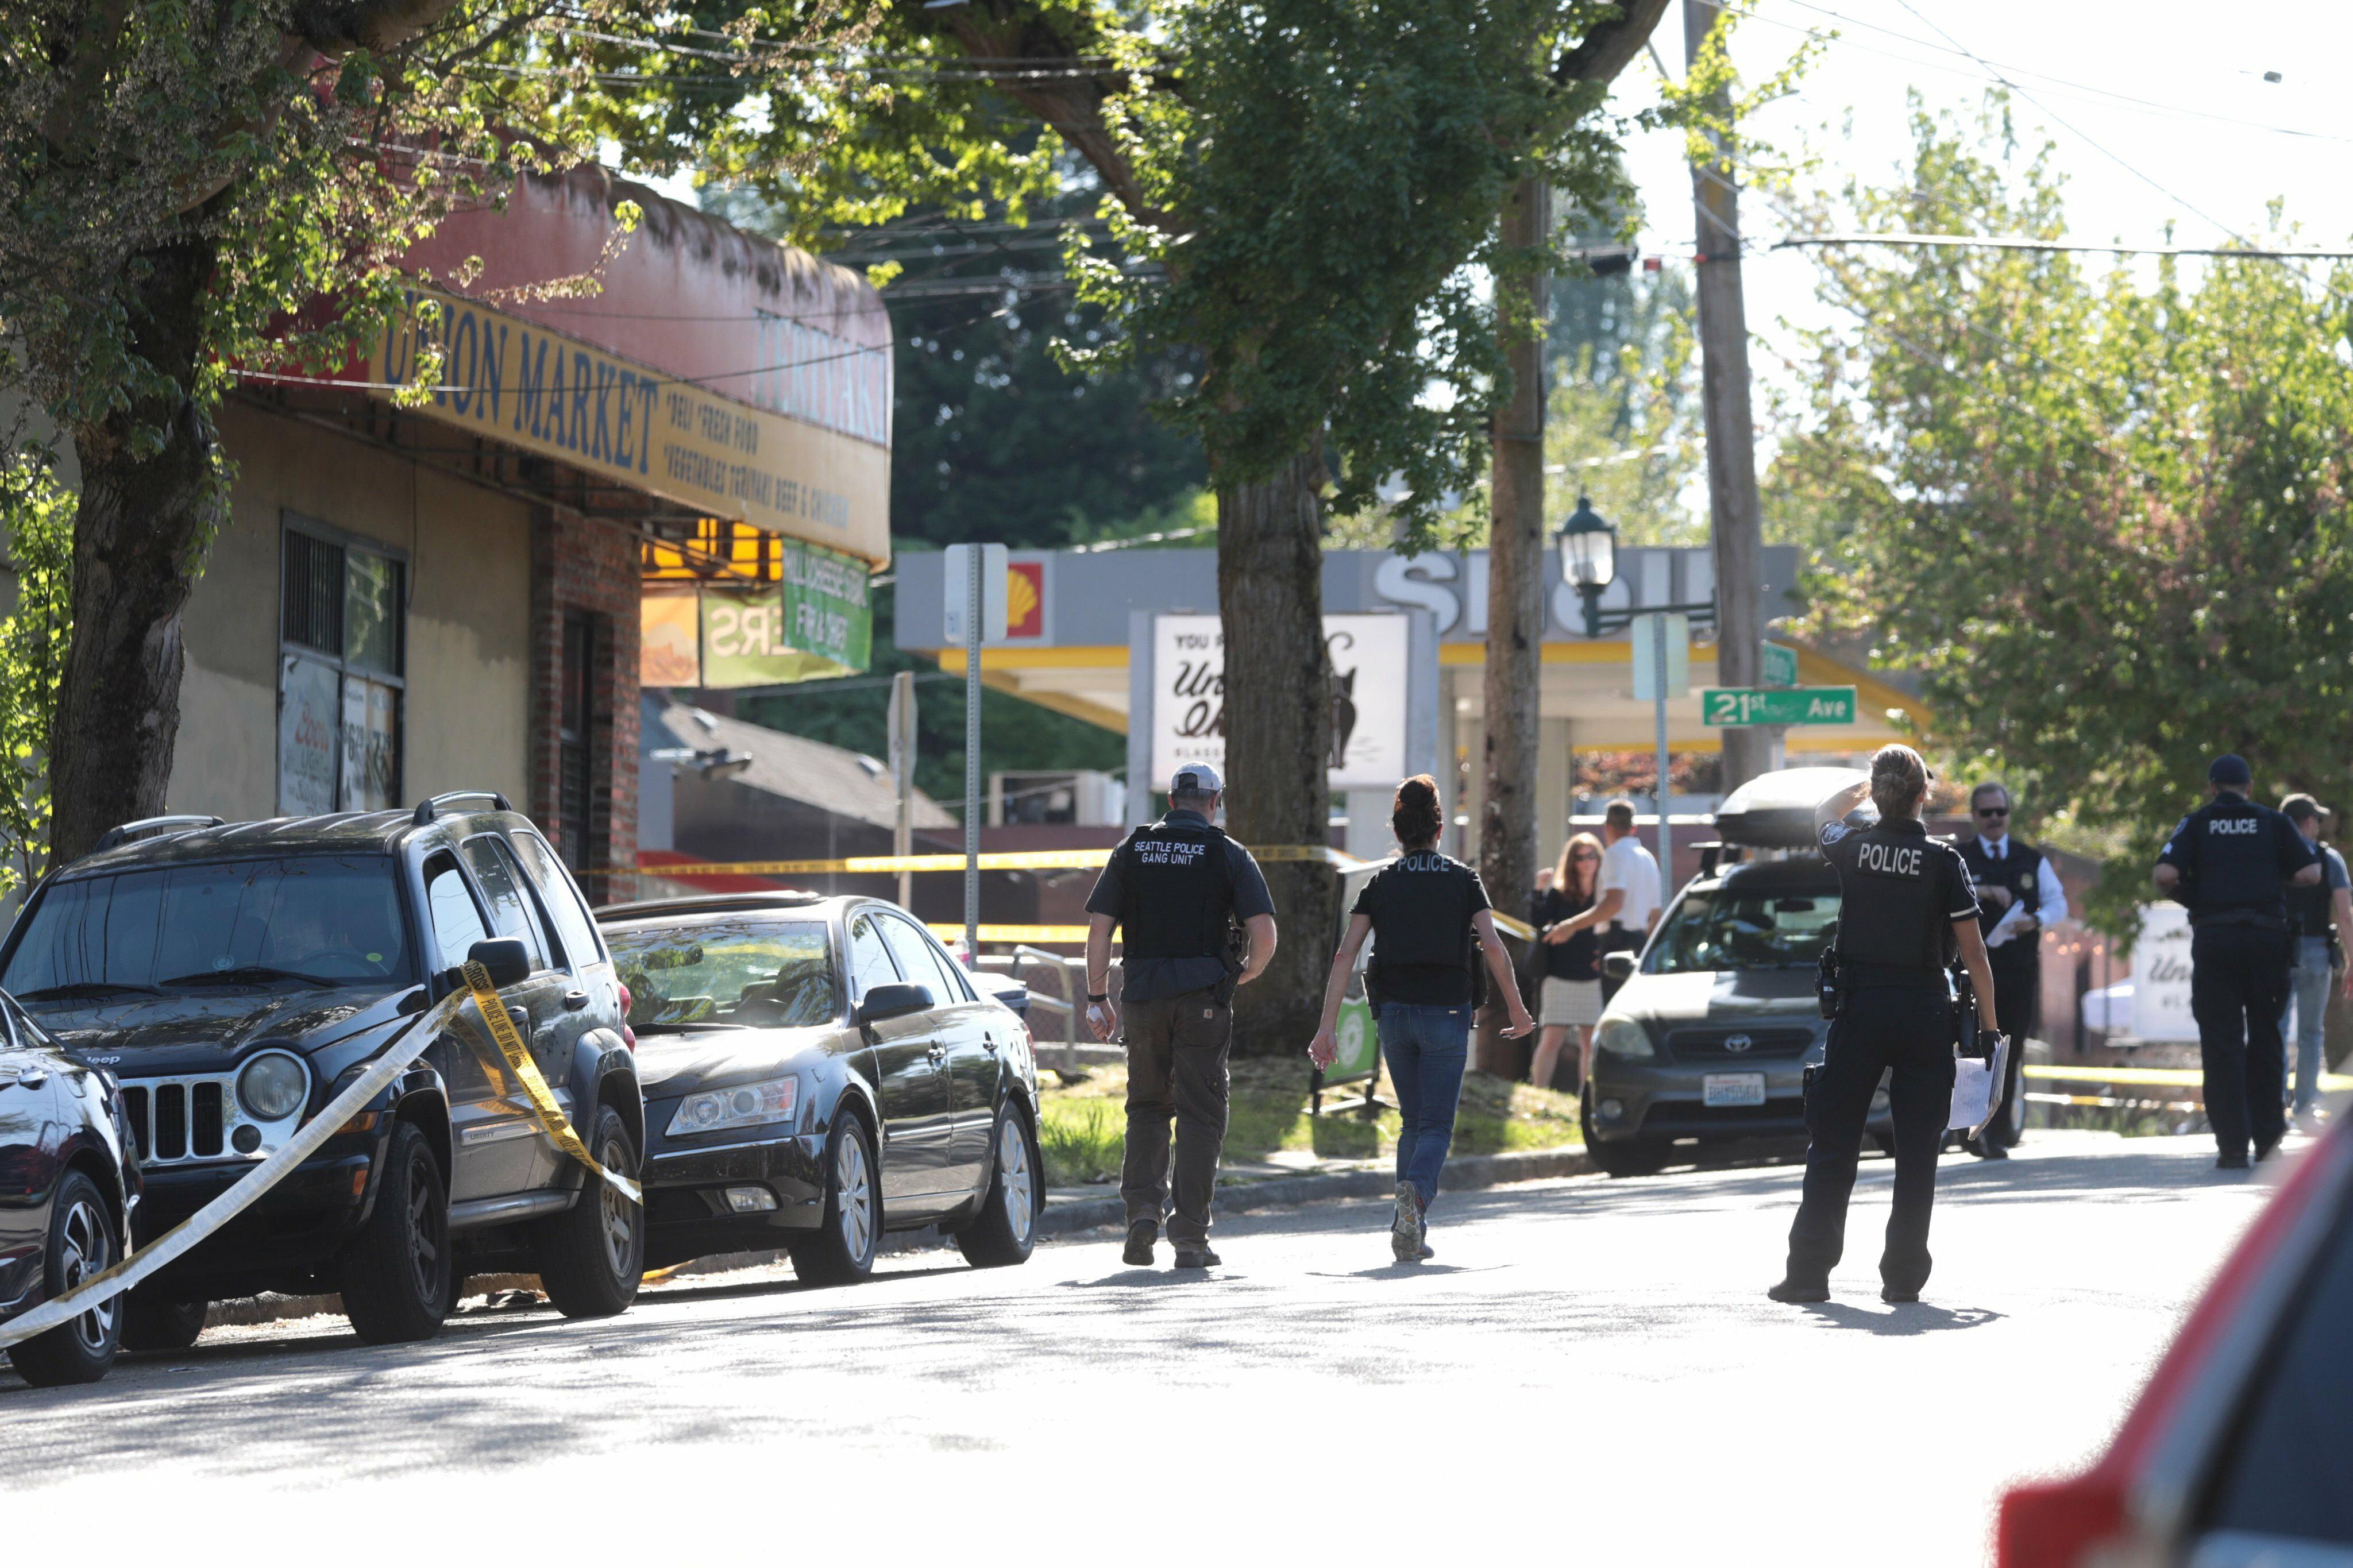 Seattle shooting leaves 1 dead, 2 injured | The Spokesman-Review